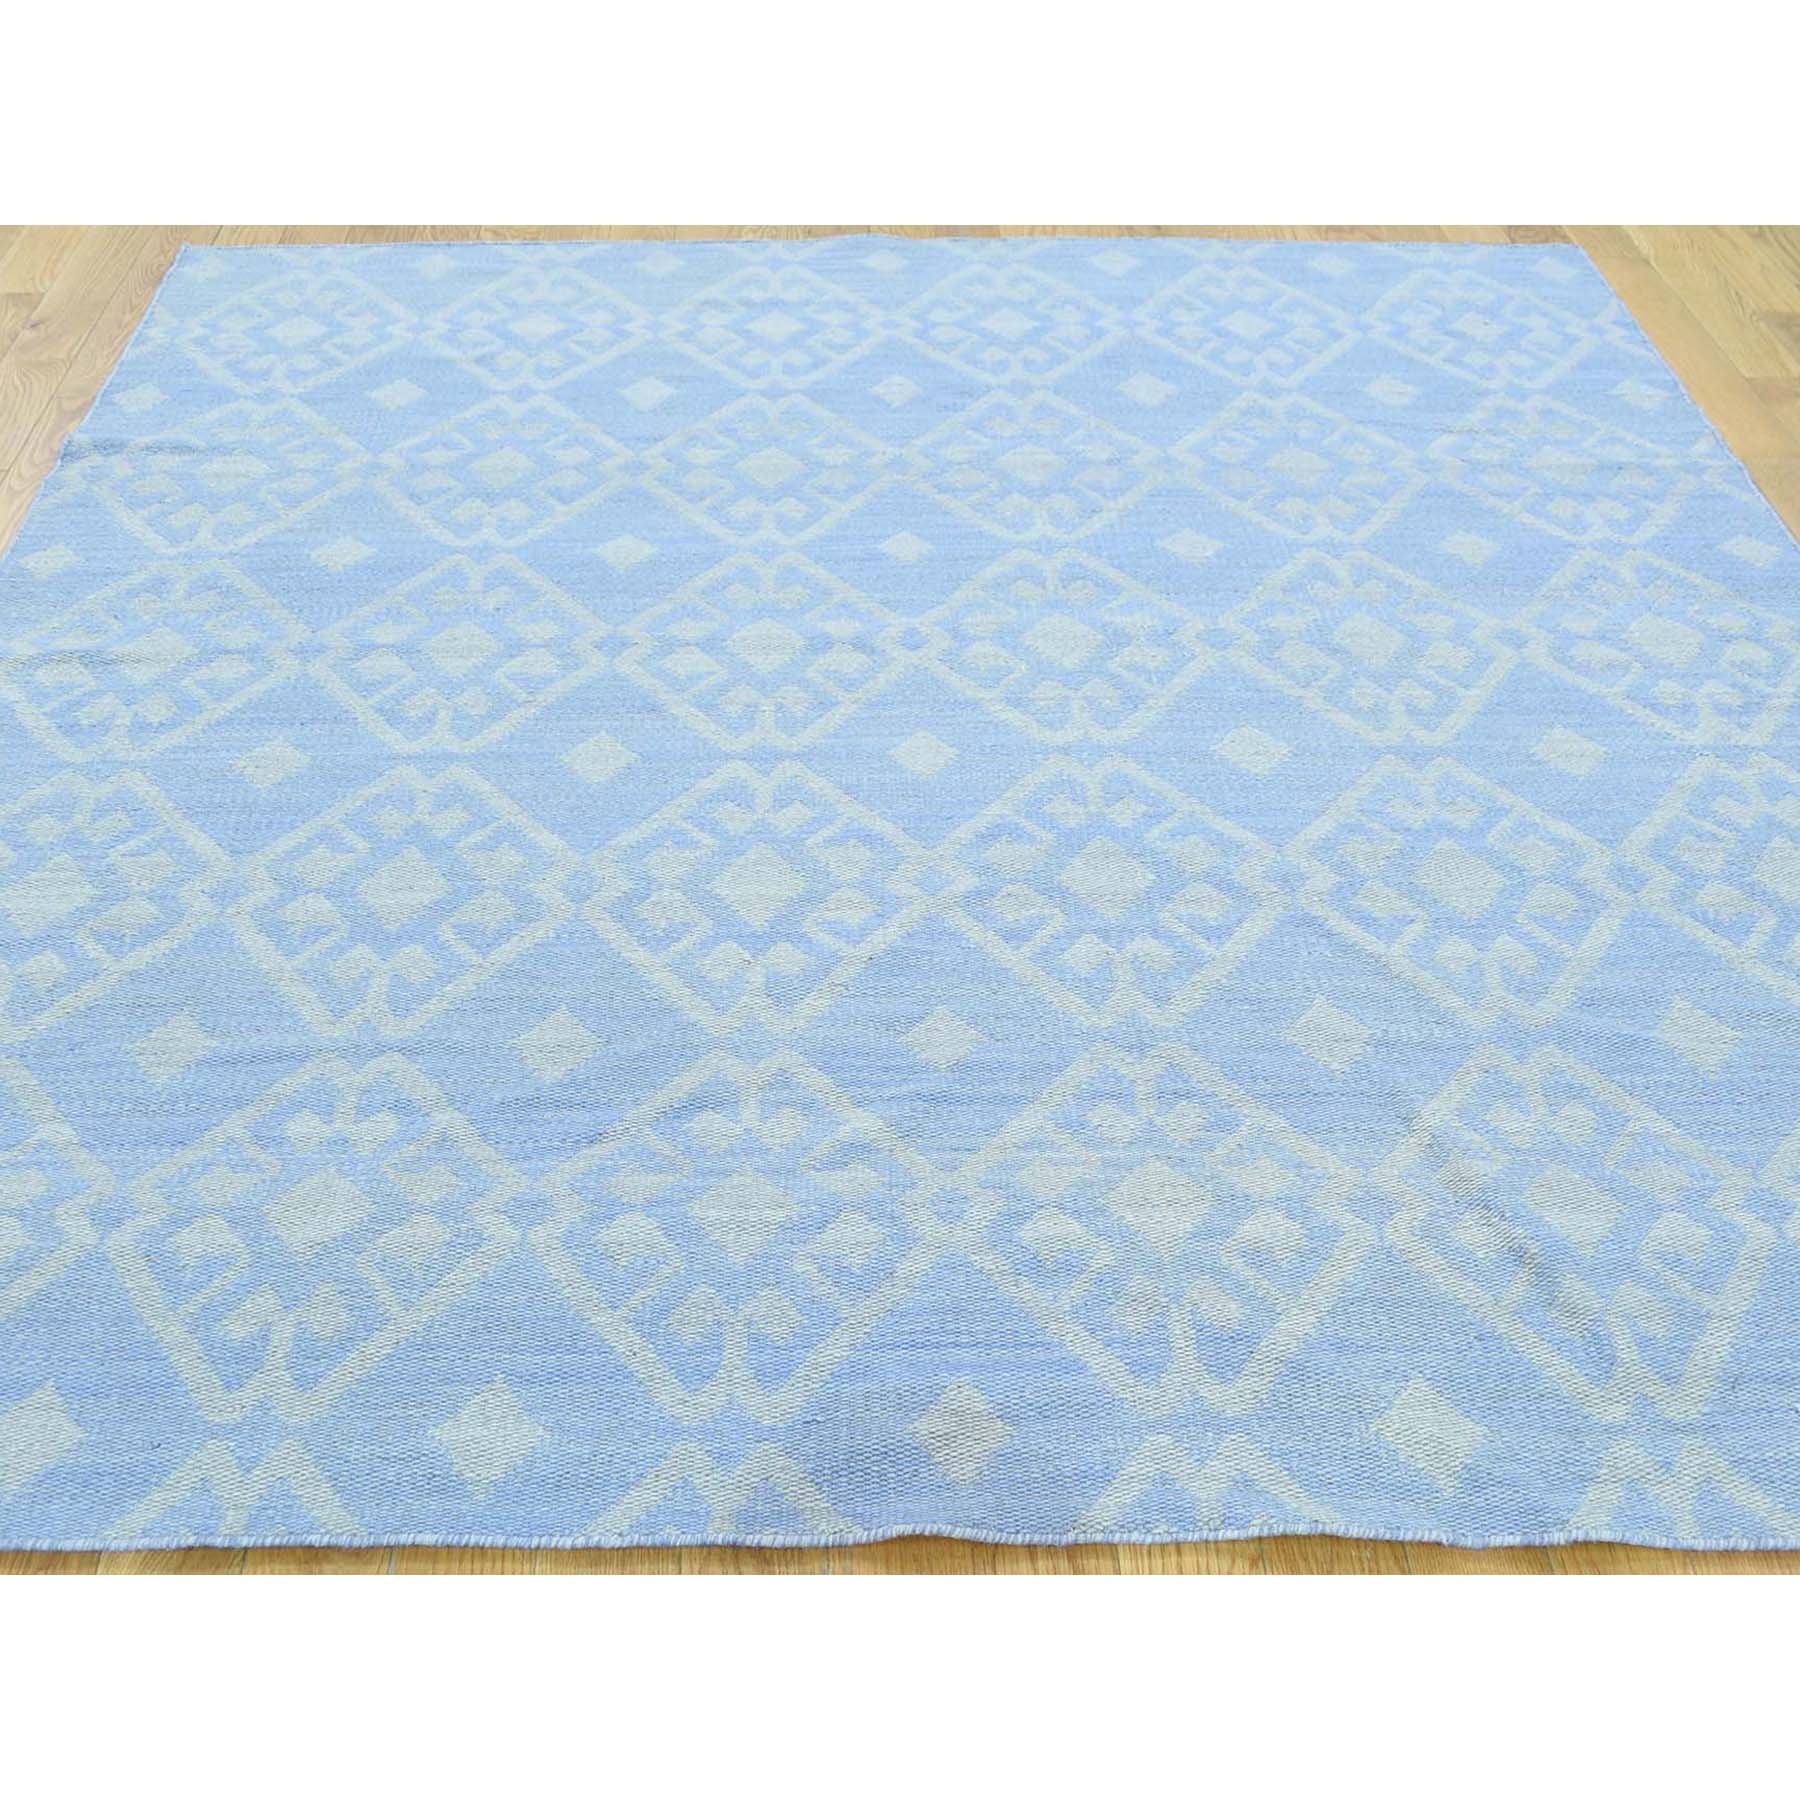 7'10"x7'10" Hand-Woven Flat Weave Reversible Durie Kilim Square Rug 